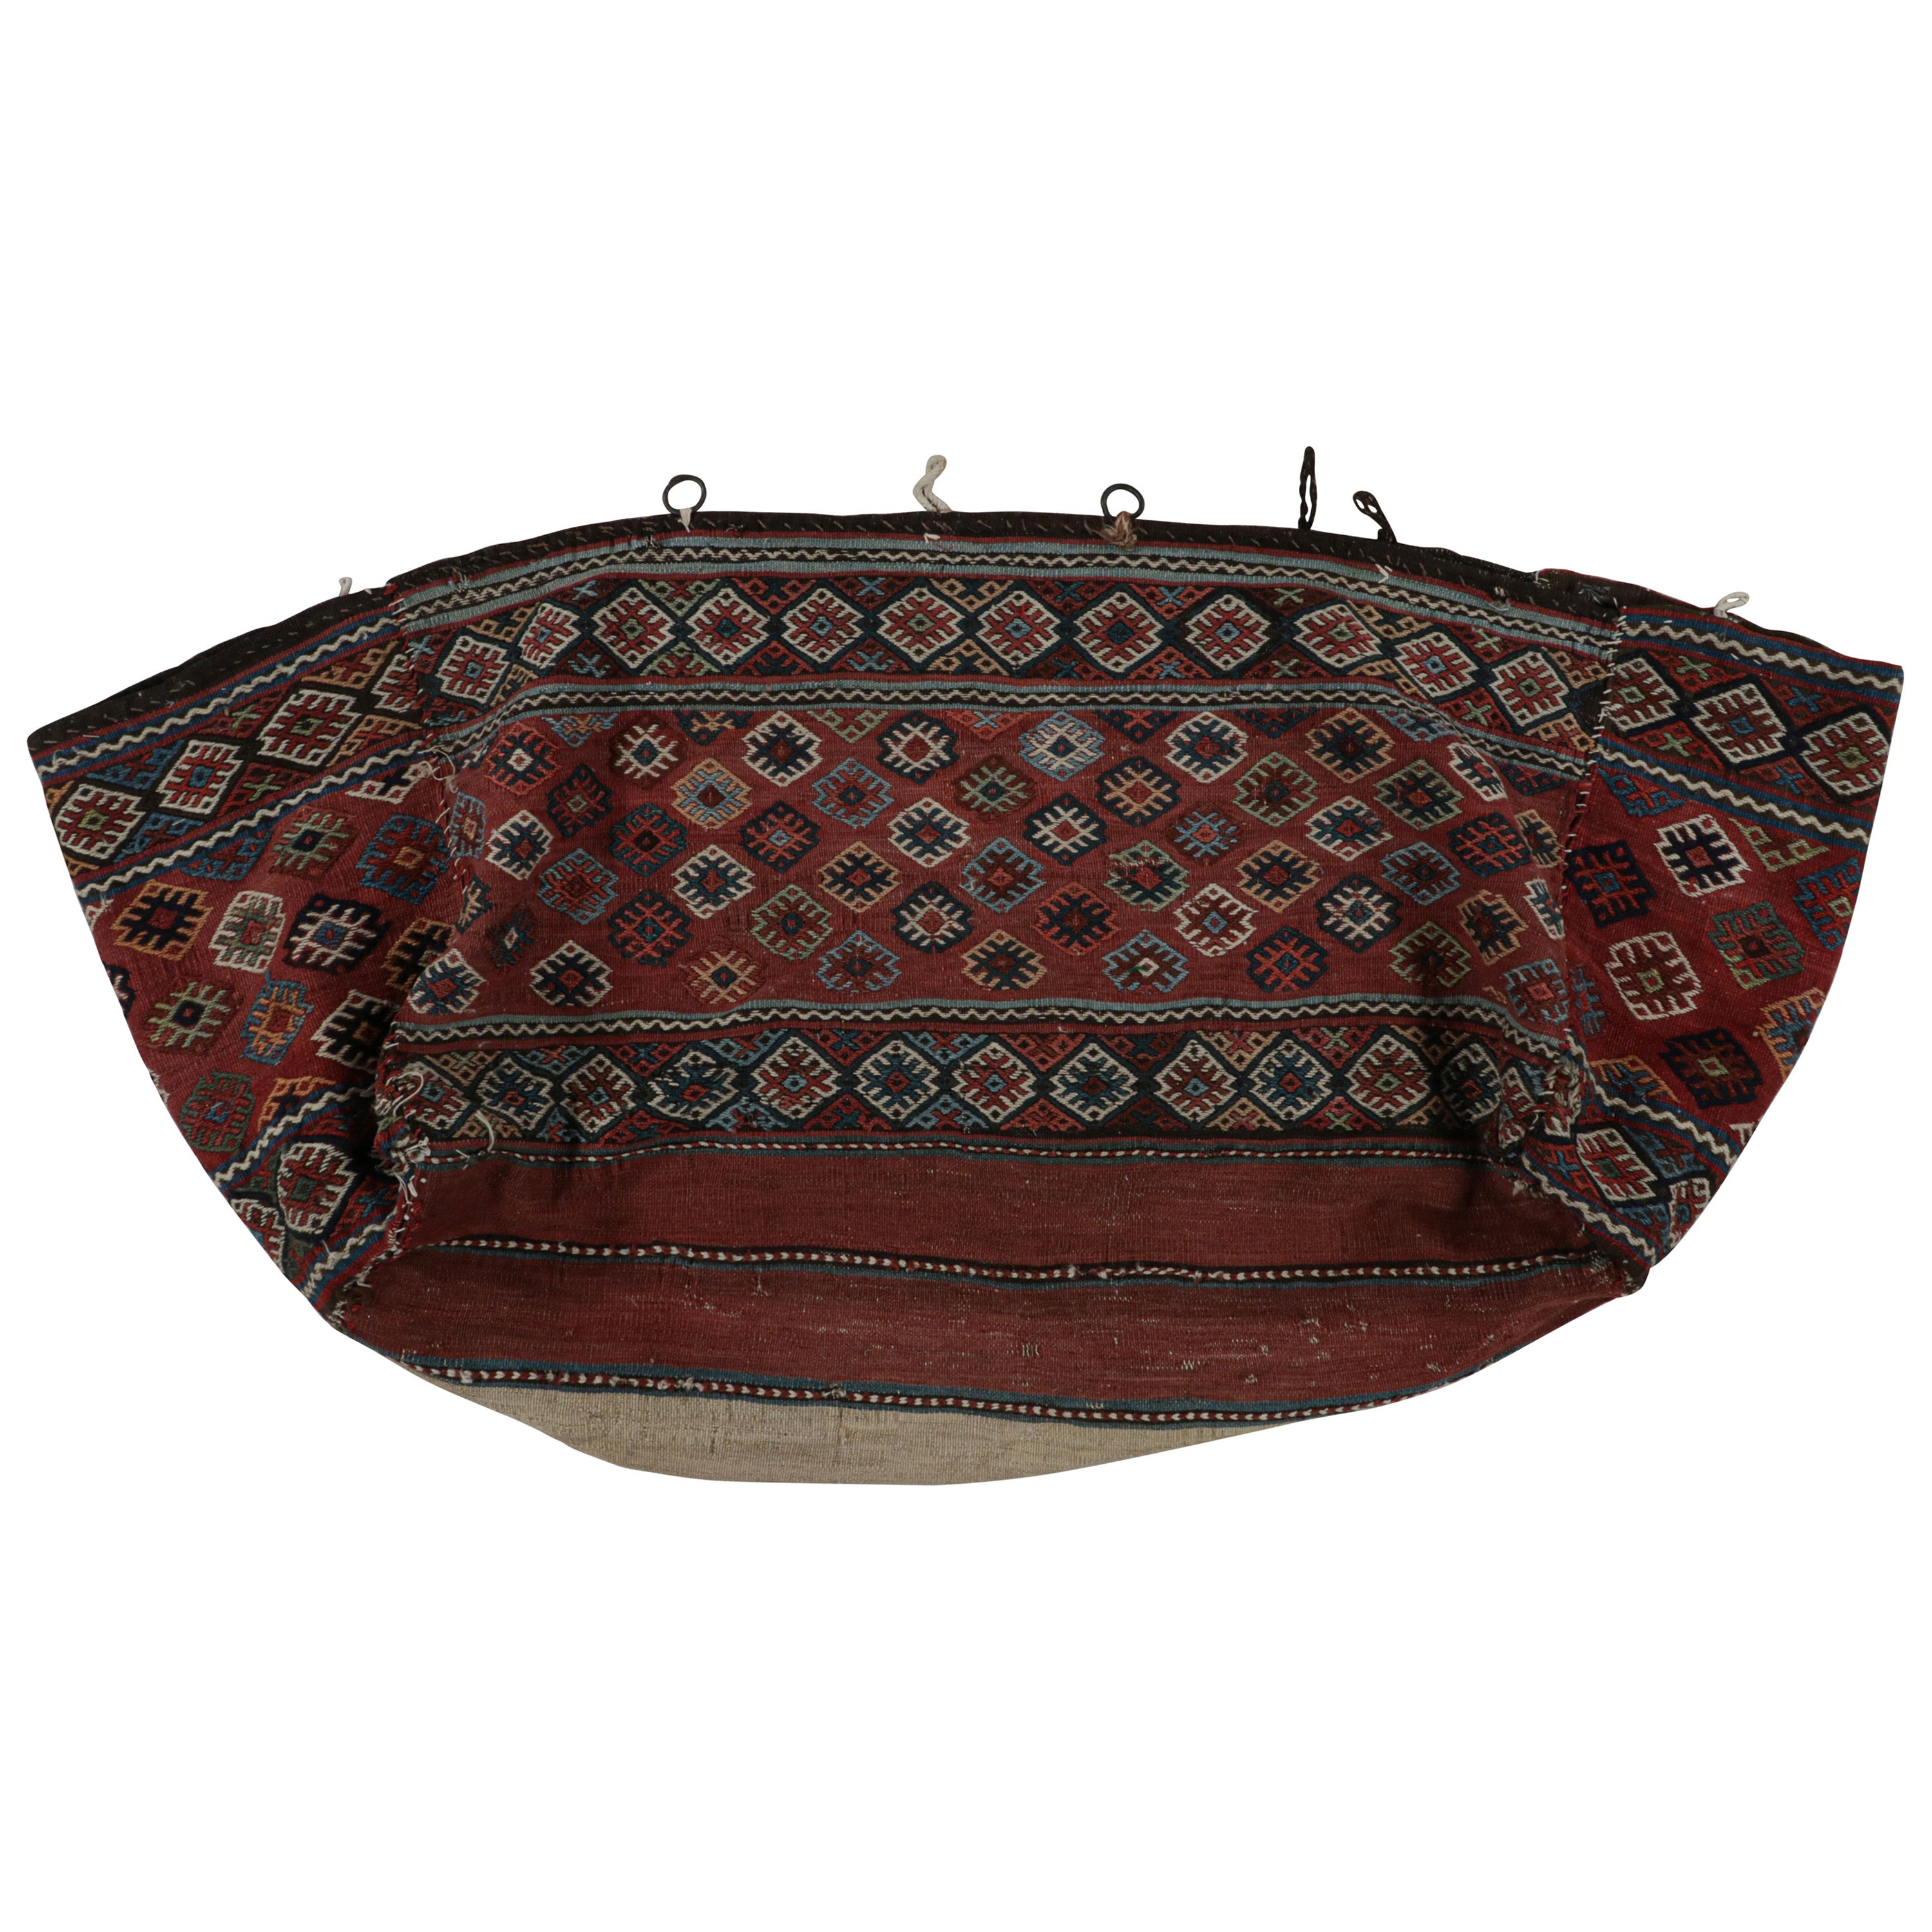 Antique Turkish Bag Kilim in Red with Geometric Patterns, from Rug & Kilim For Sale